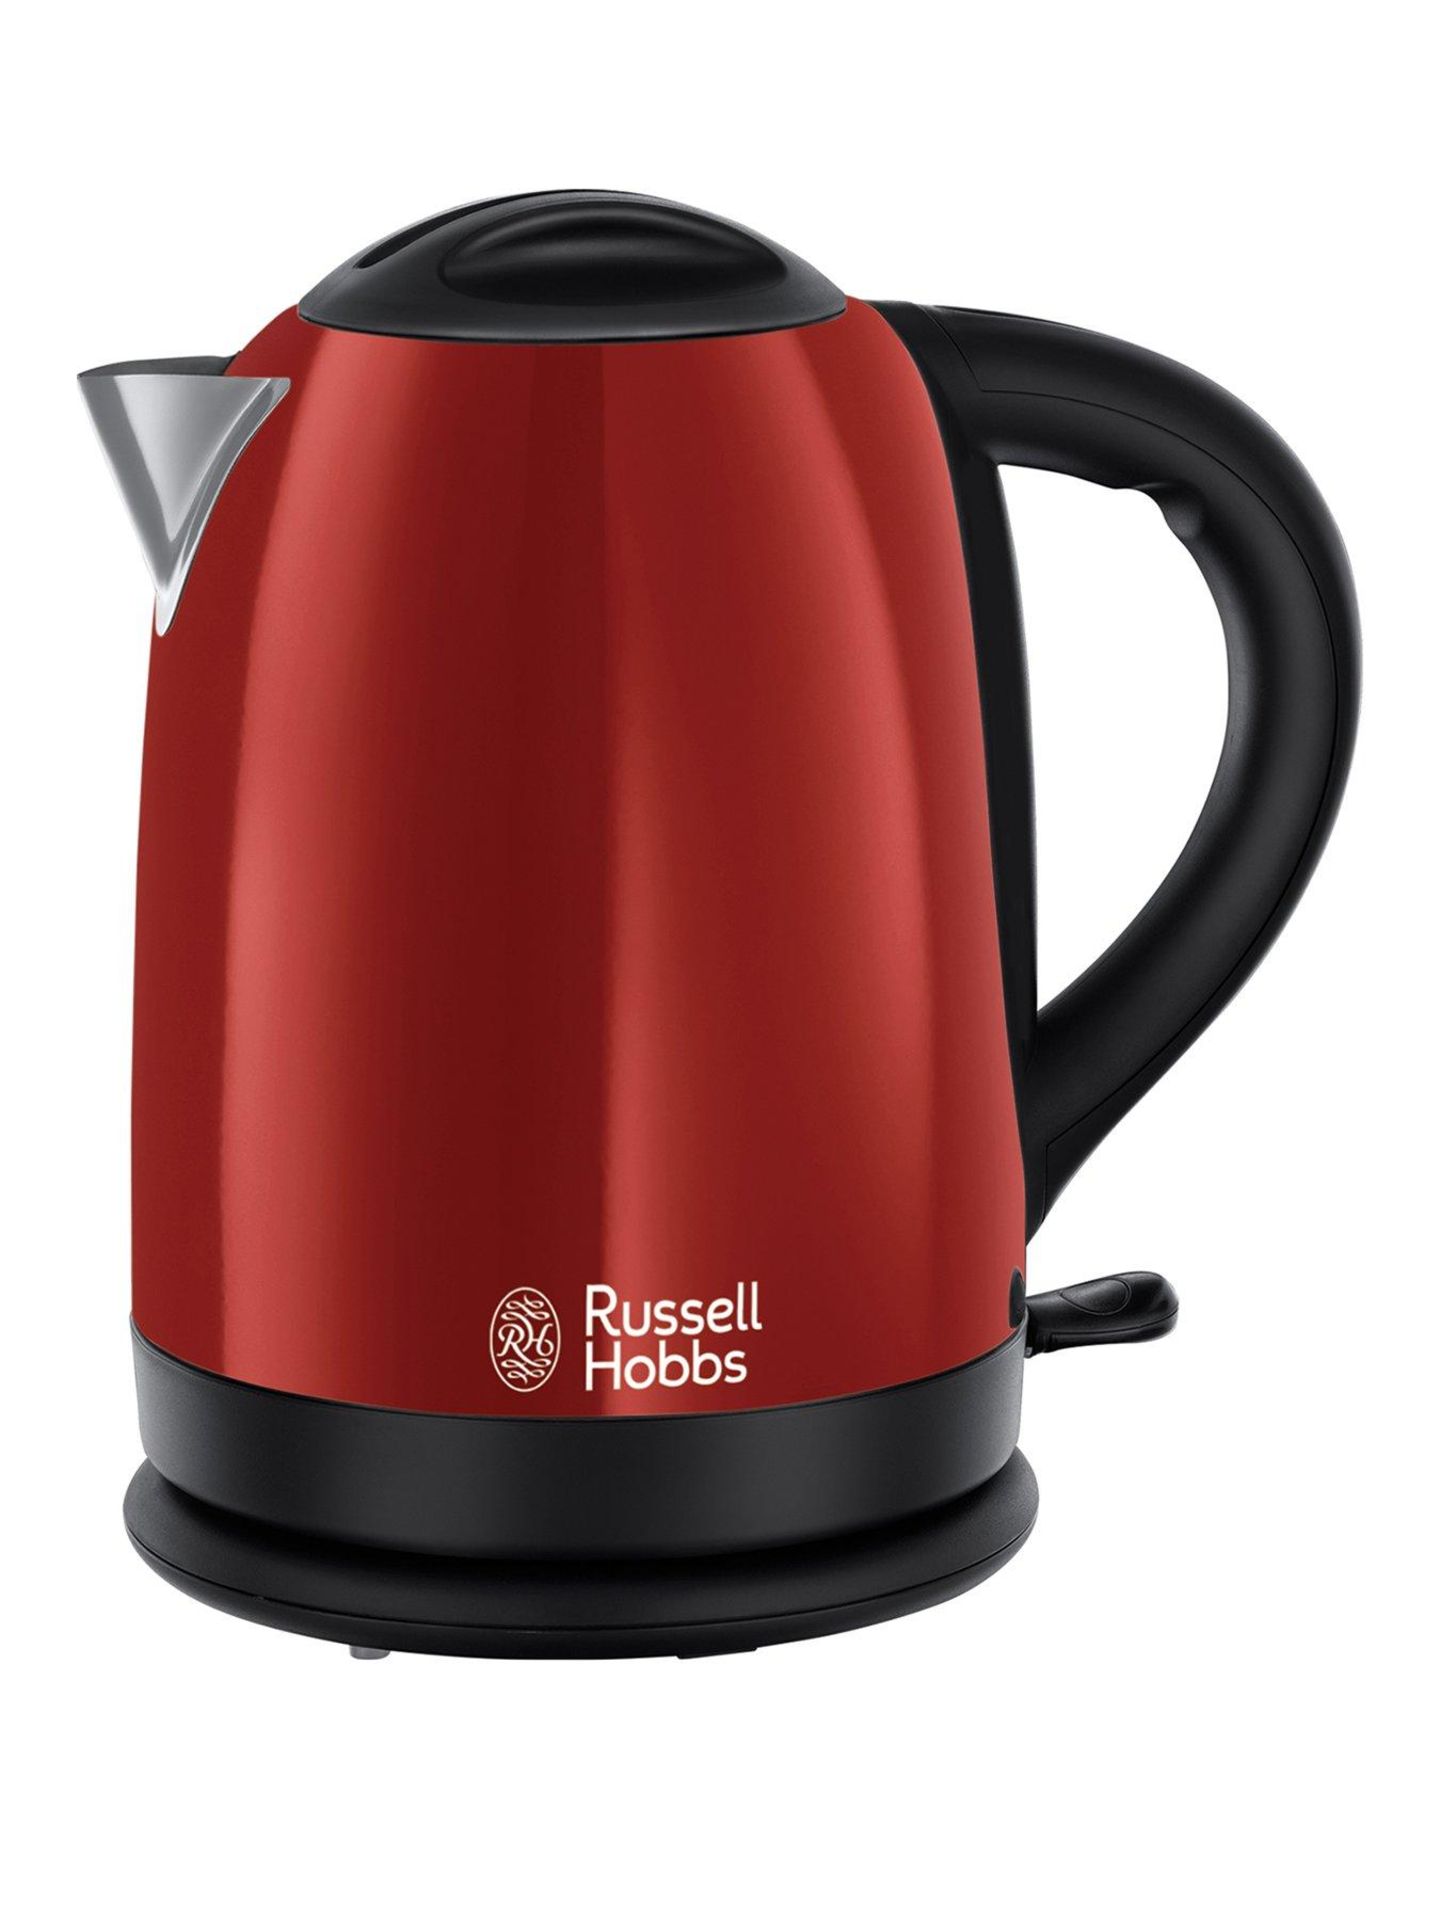 V Brand New Russel Hobbs Red Dorchester Kettle - Perfect Pour - Saves Up To 70% Energy - Littlewoods